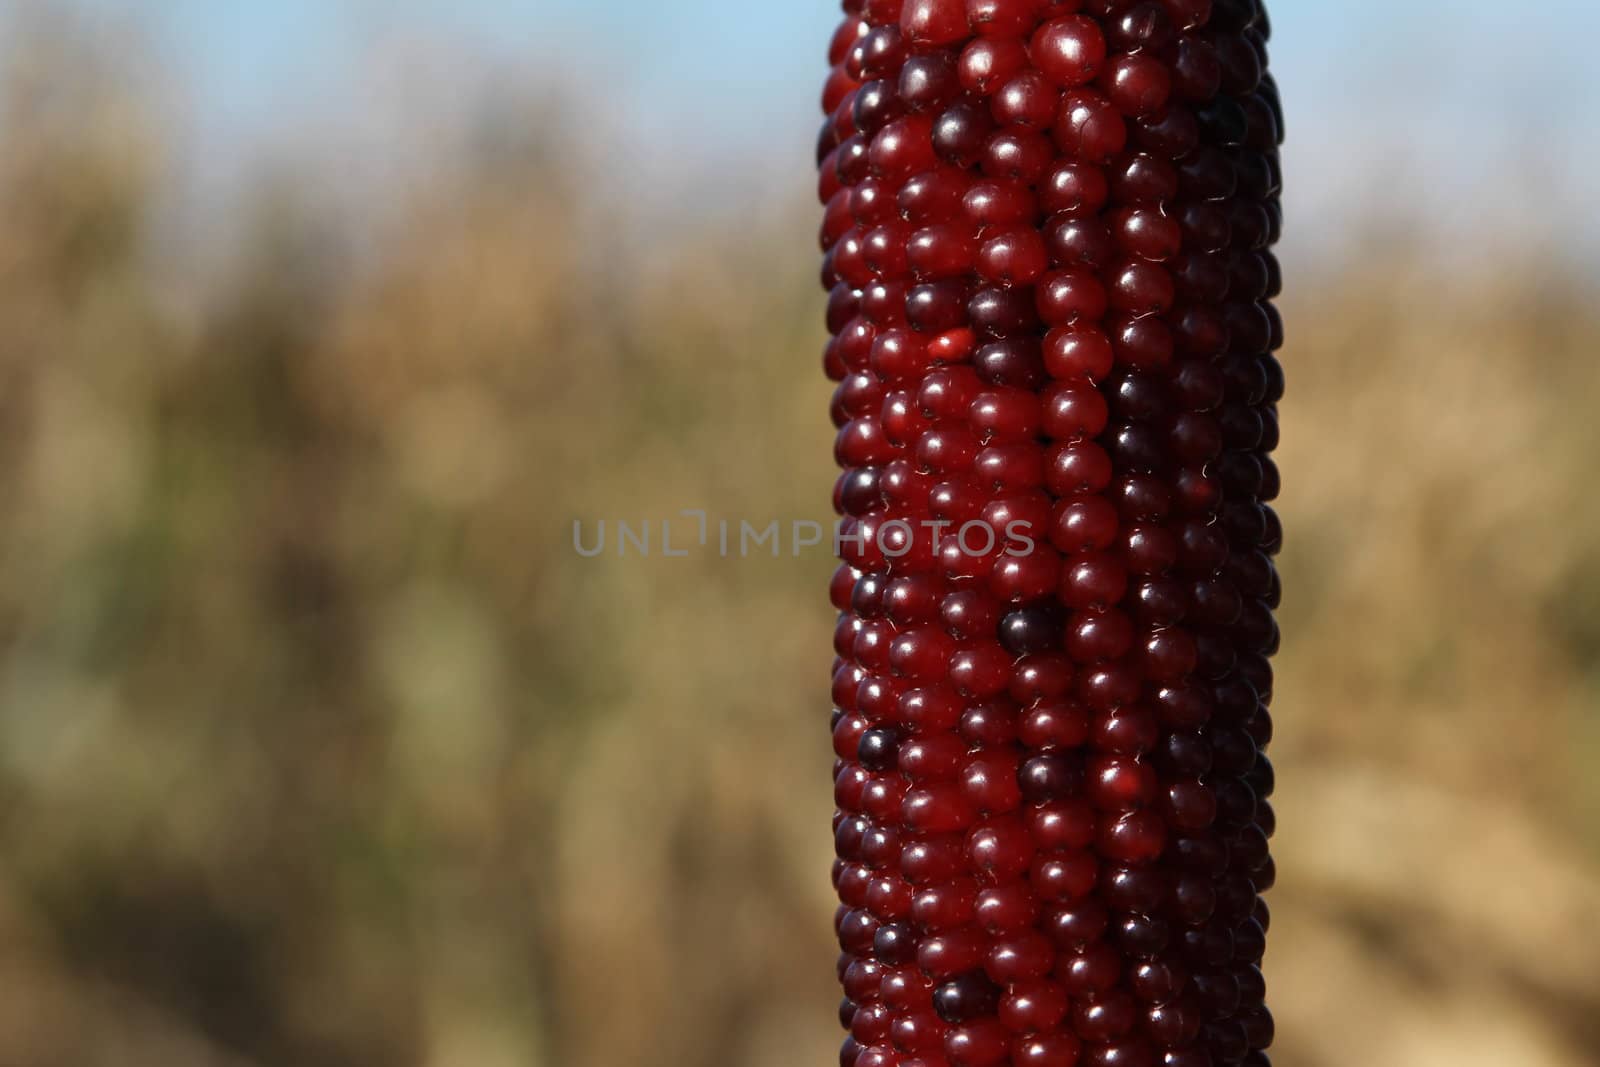 Red corncob in a corn field, early autumn
